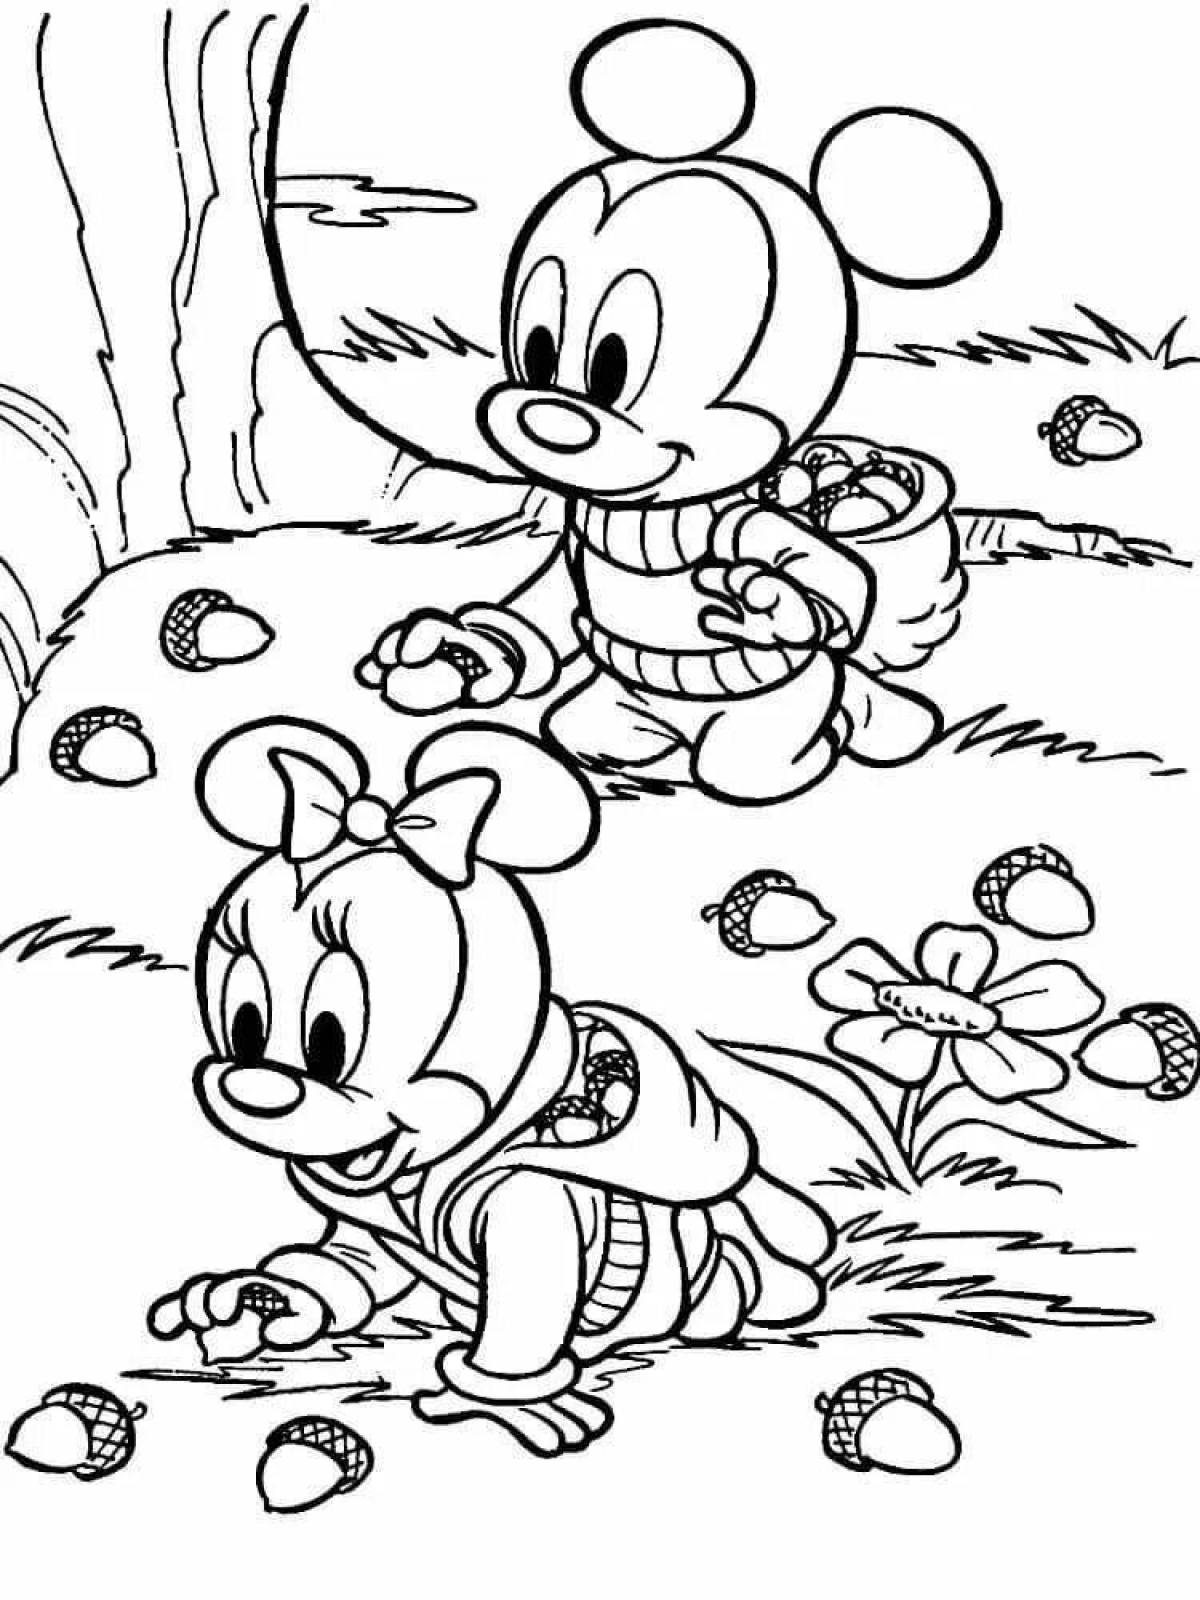 Color-frenzy coloring page for children 7-9 years old